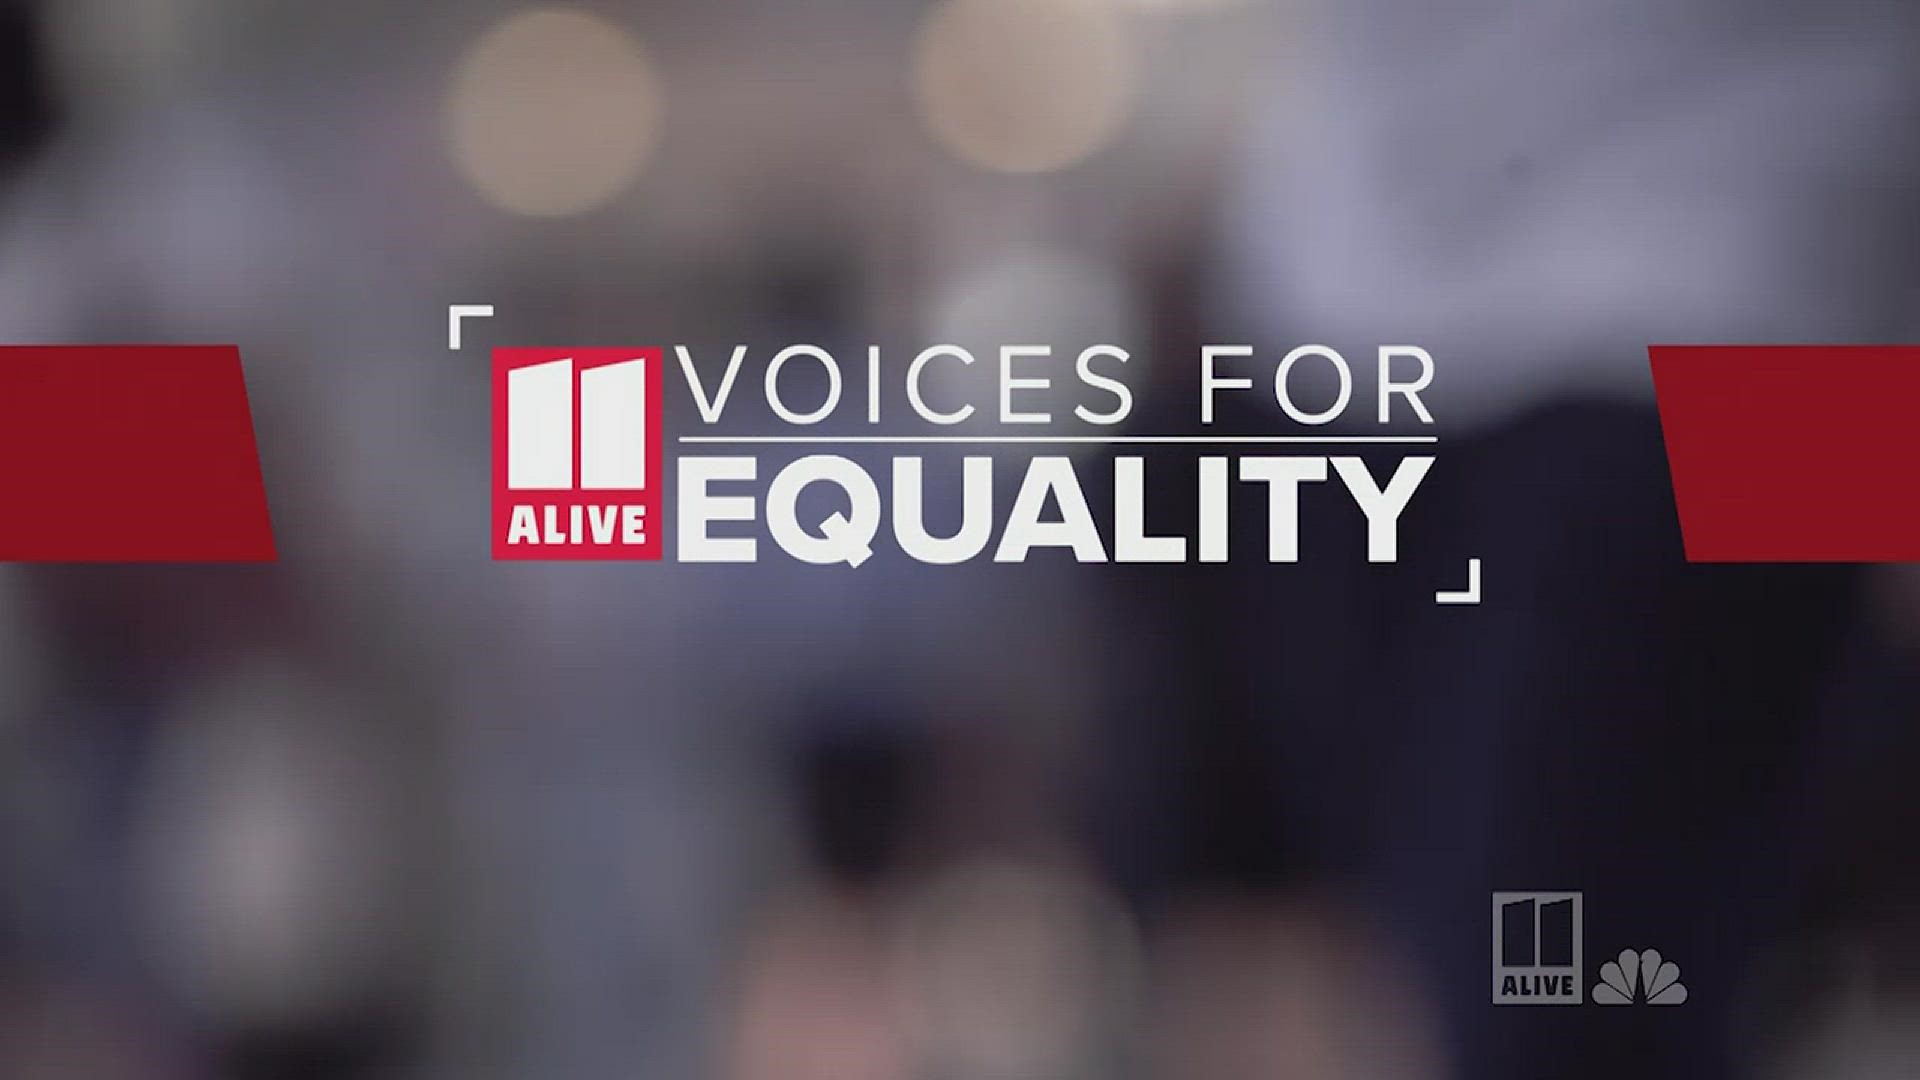 11Alive spoke with several LGBTQ+ people about their experience and what it means to live life out loud.